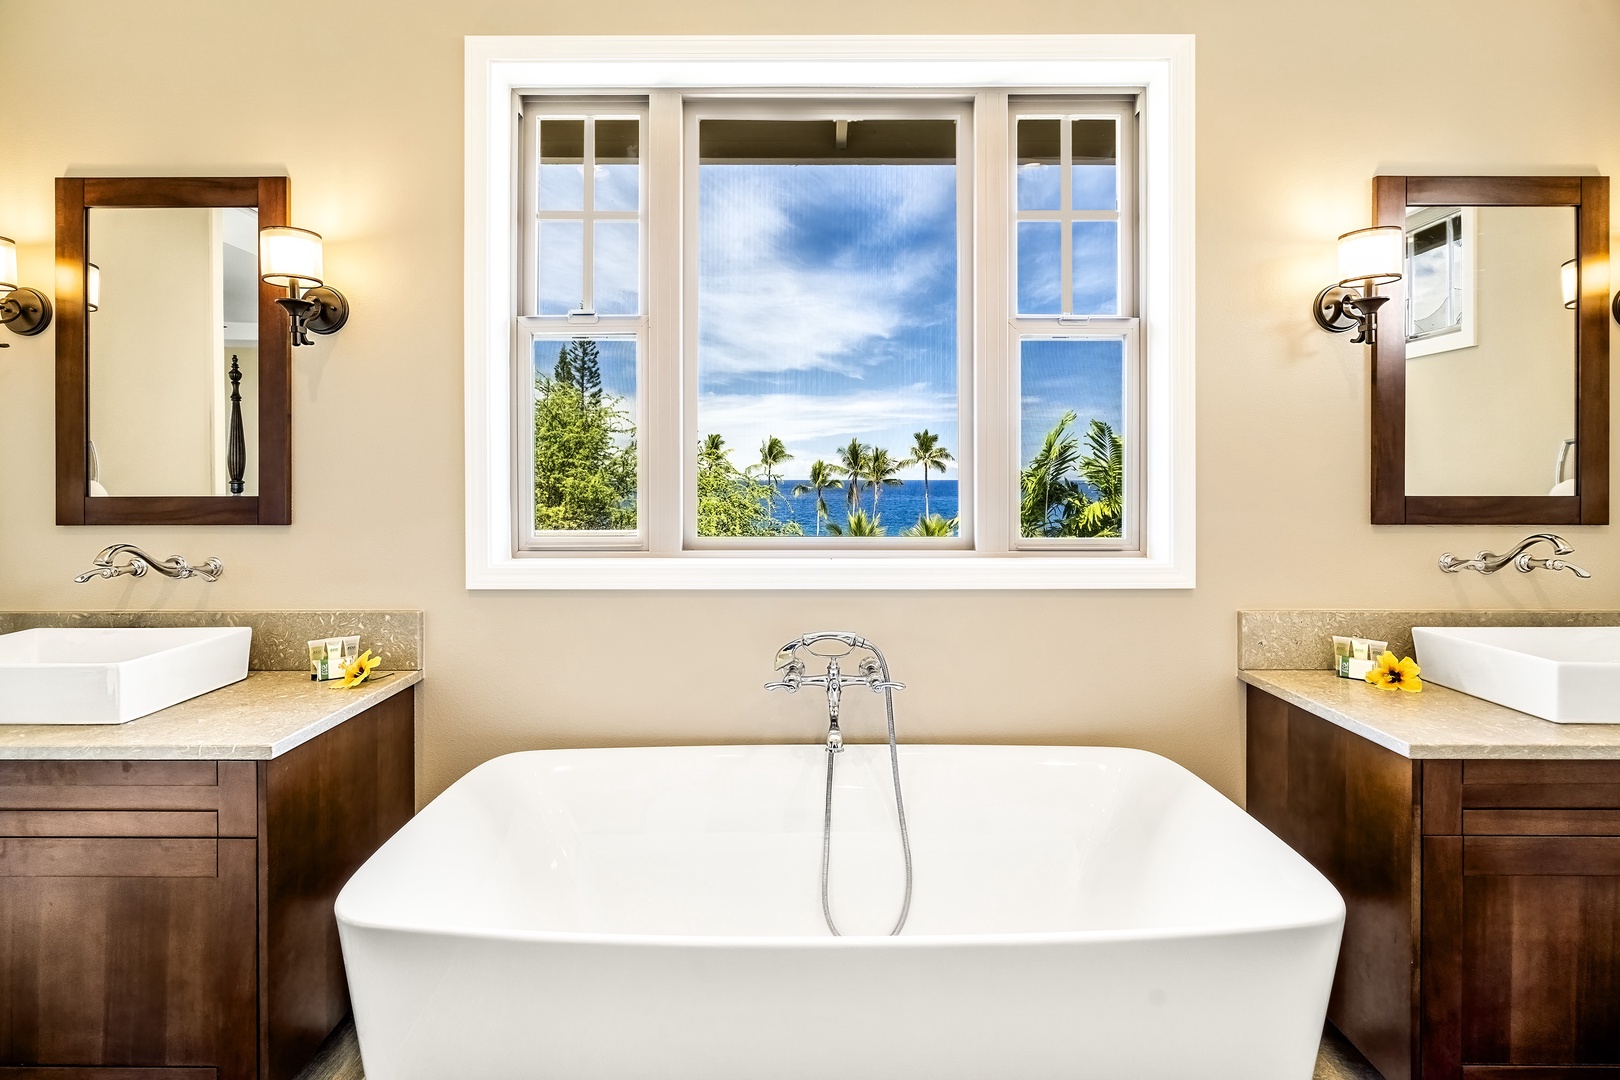 Kailua Kona Vacation Rentals, Green/Blue Combo - Soak in the tub while taking in the views!